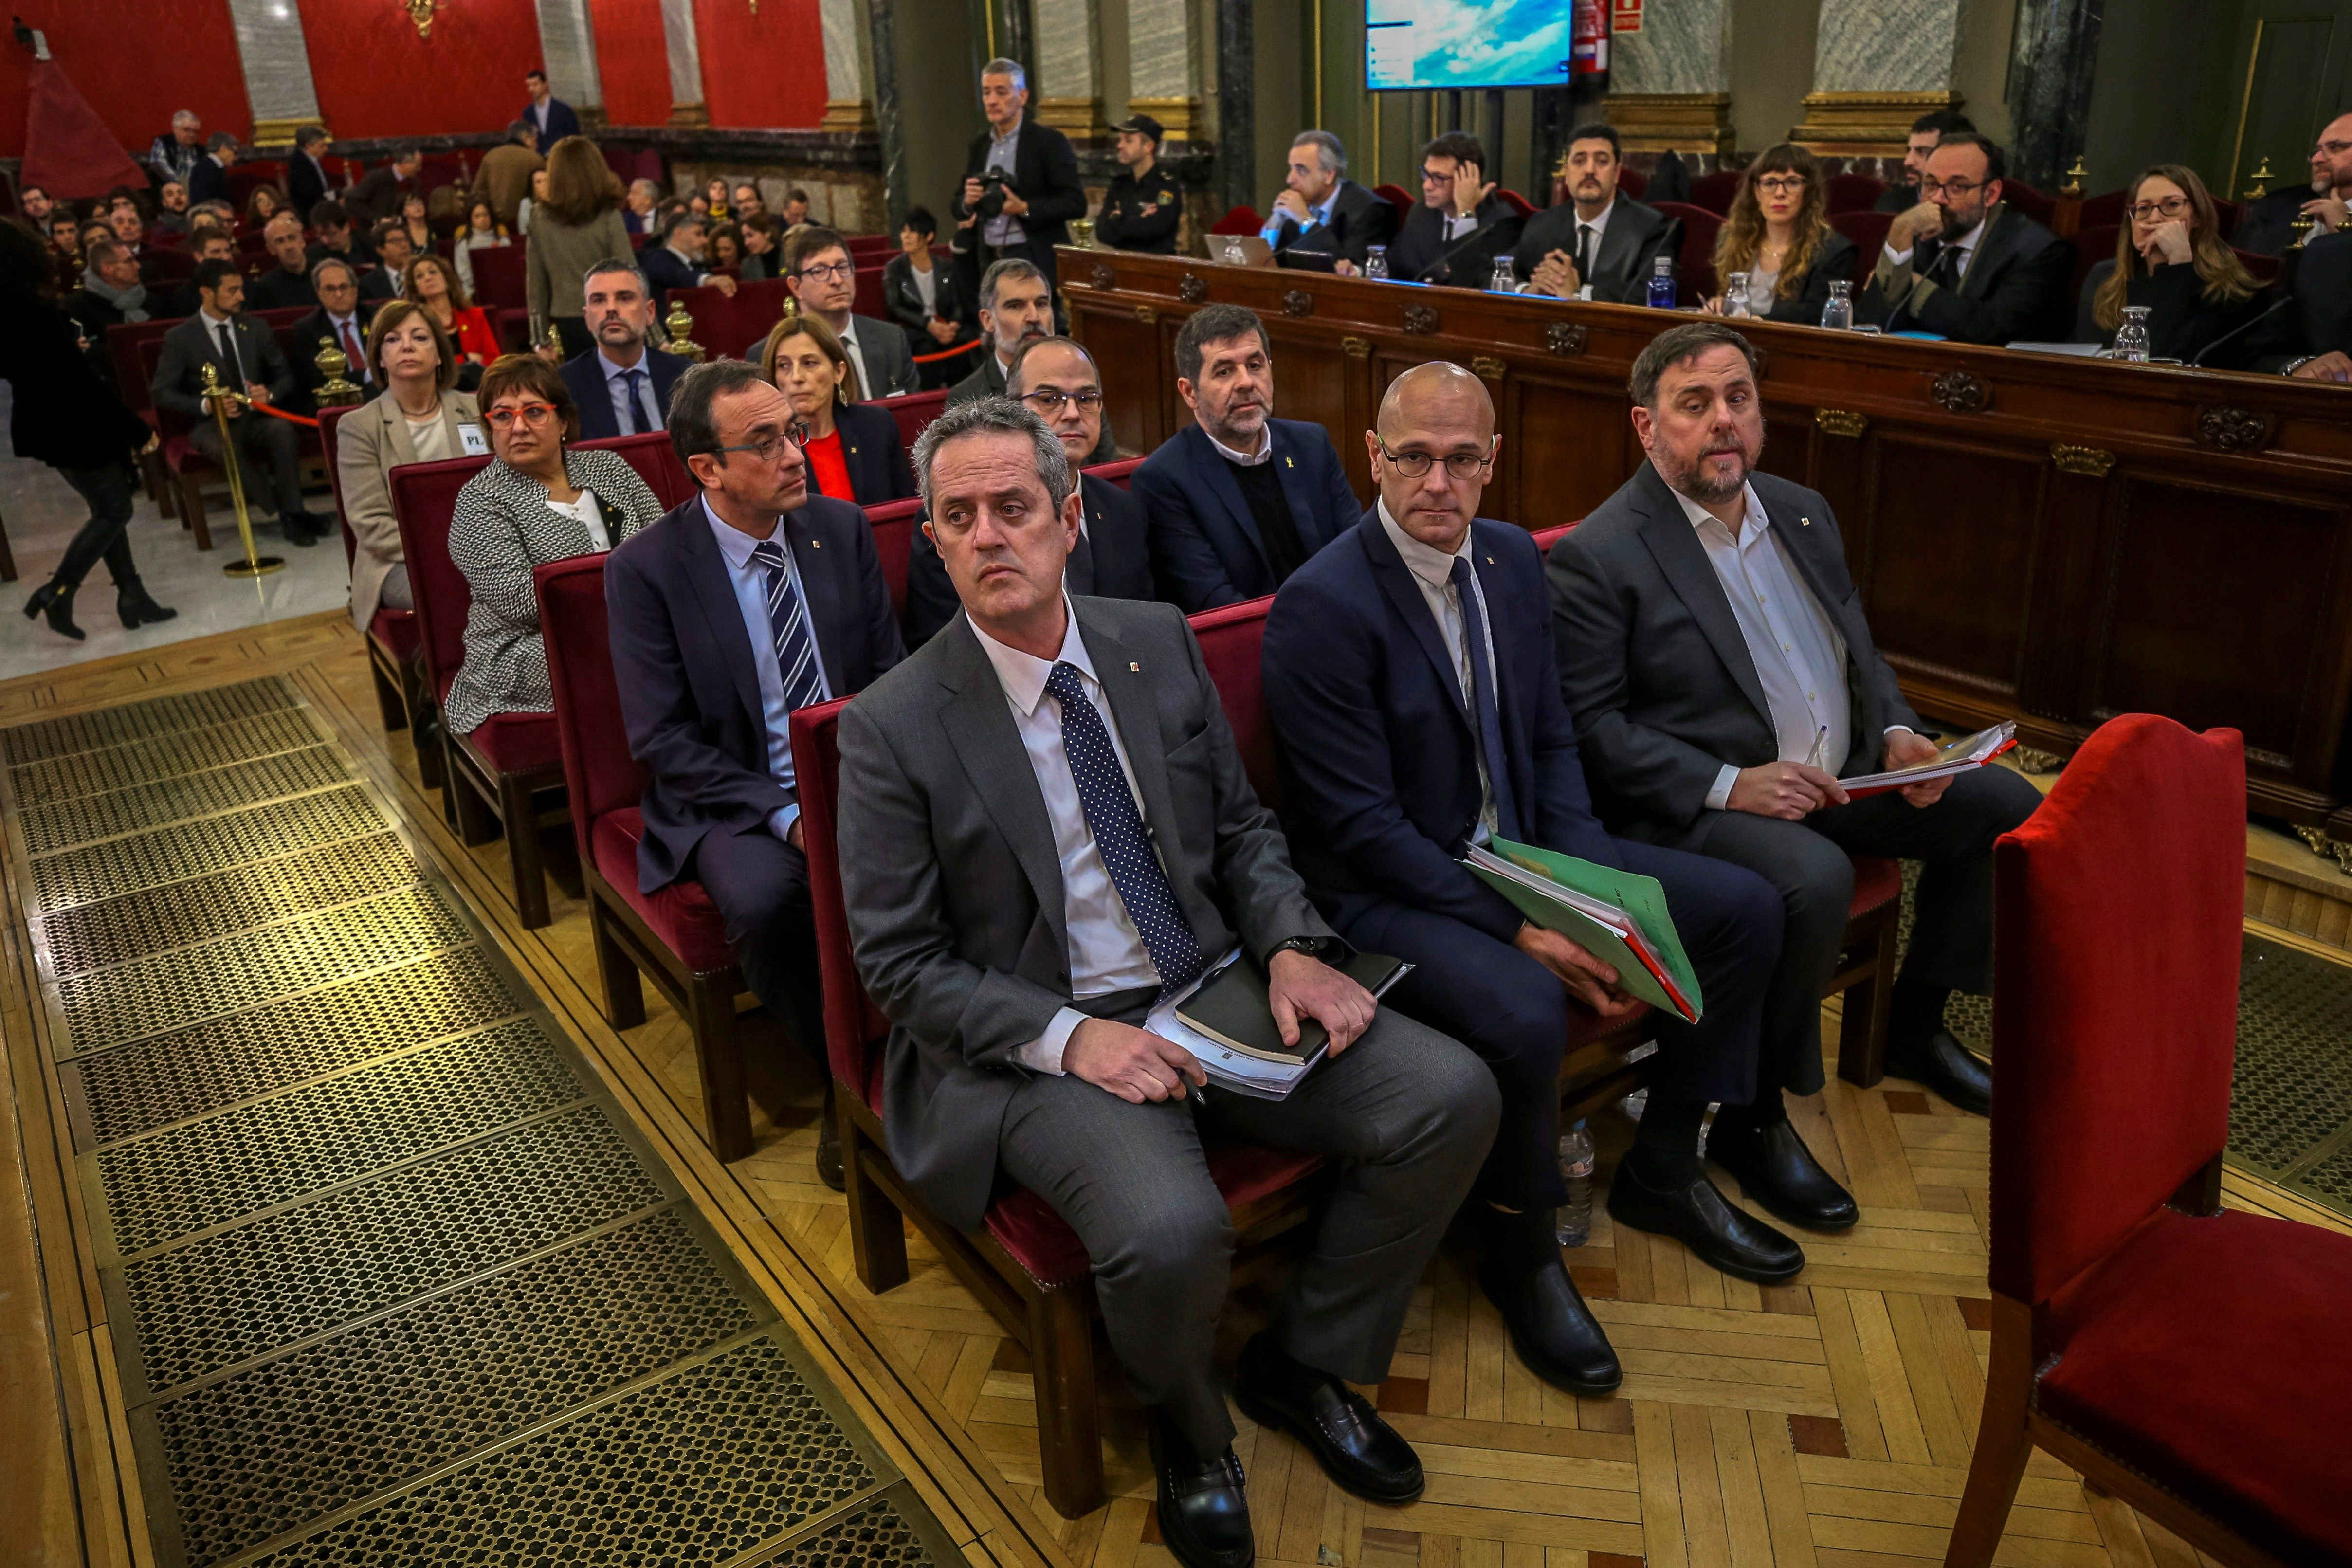 12 Catalan leaders sit in the dock in Spain's Supreme Court (by ACN)